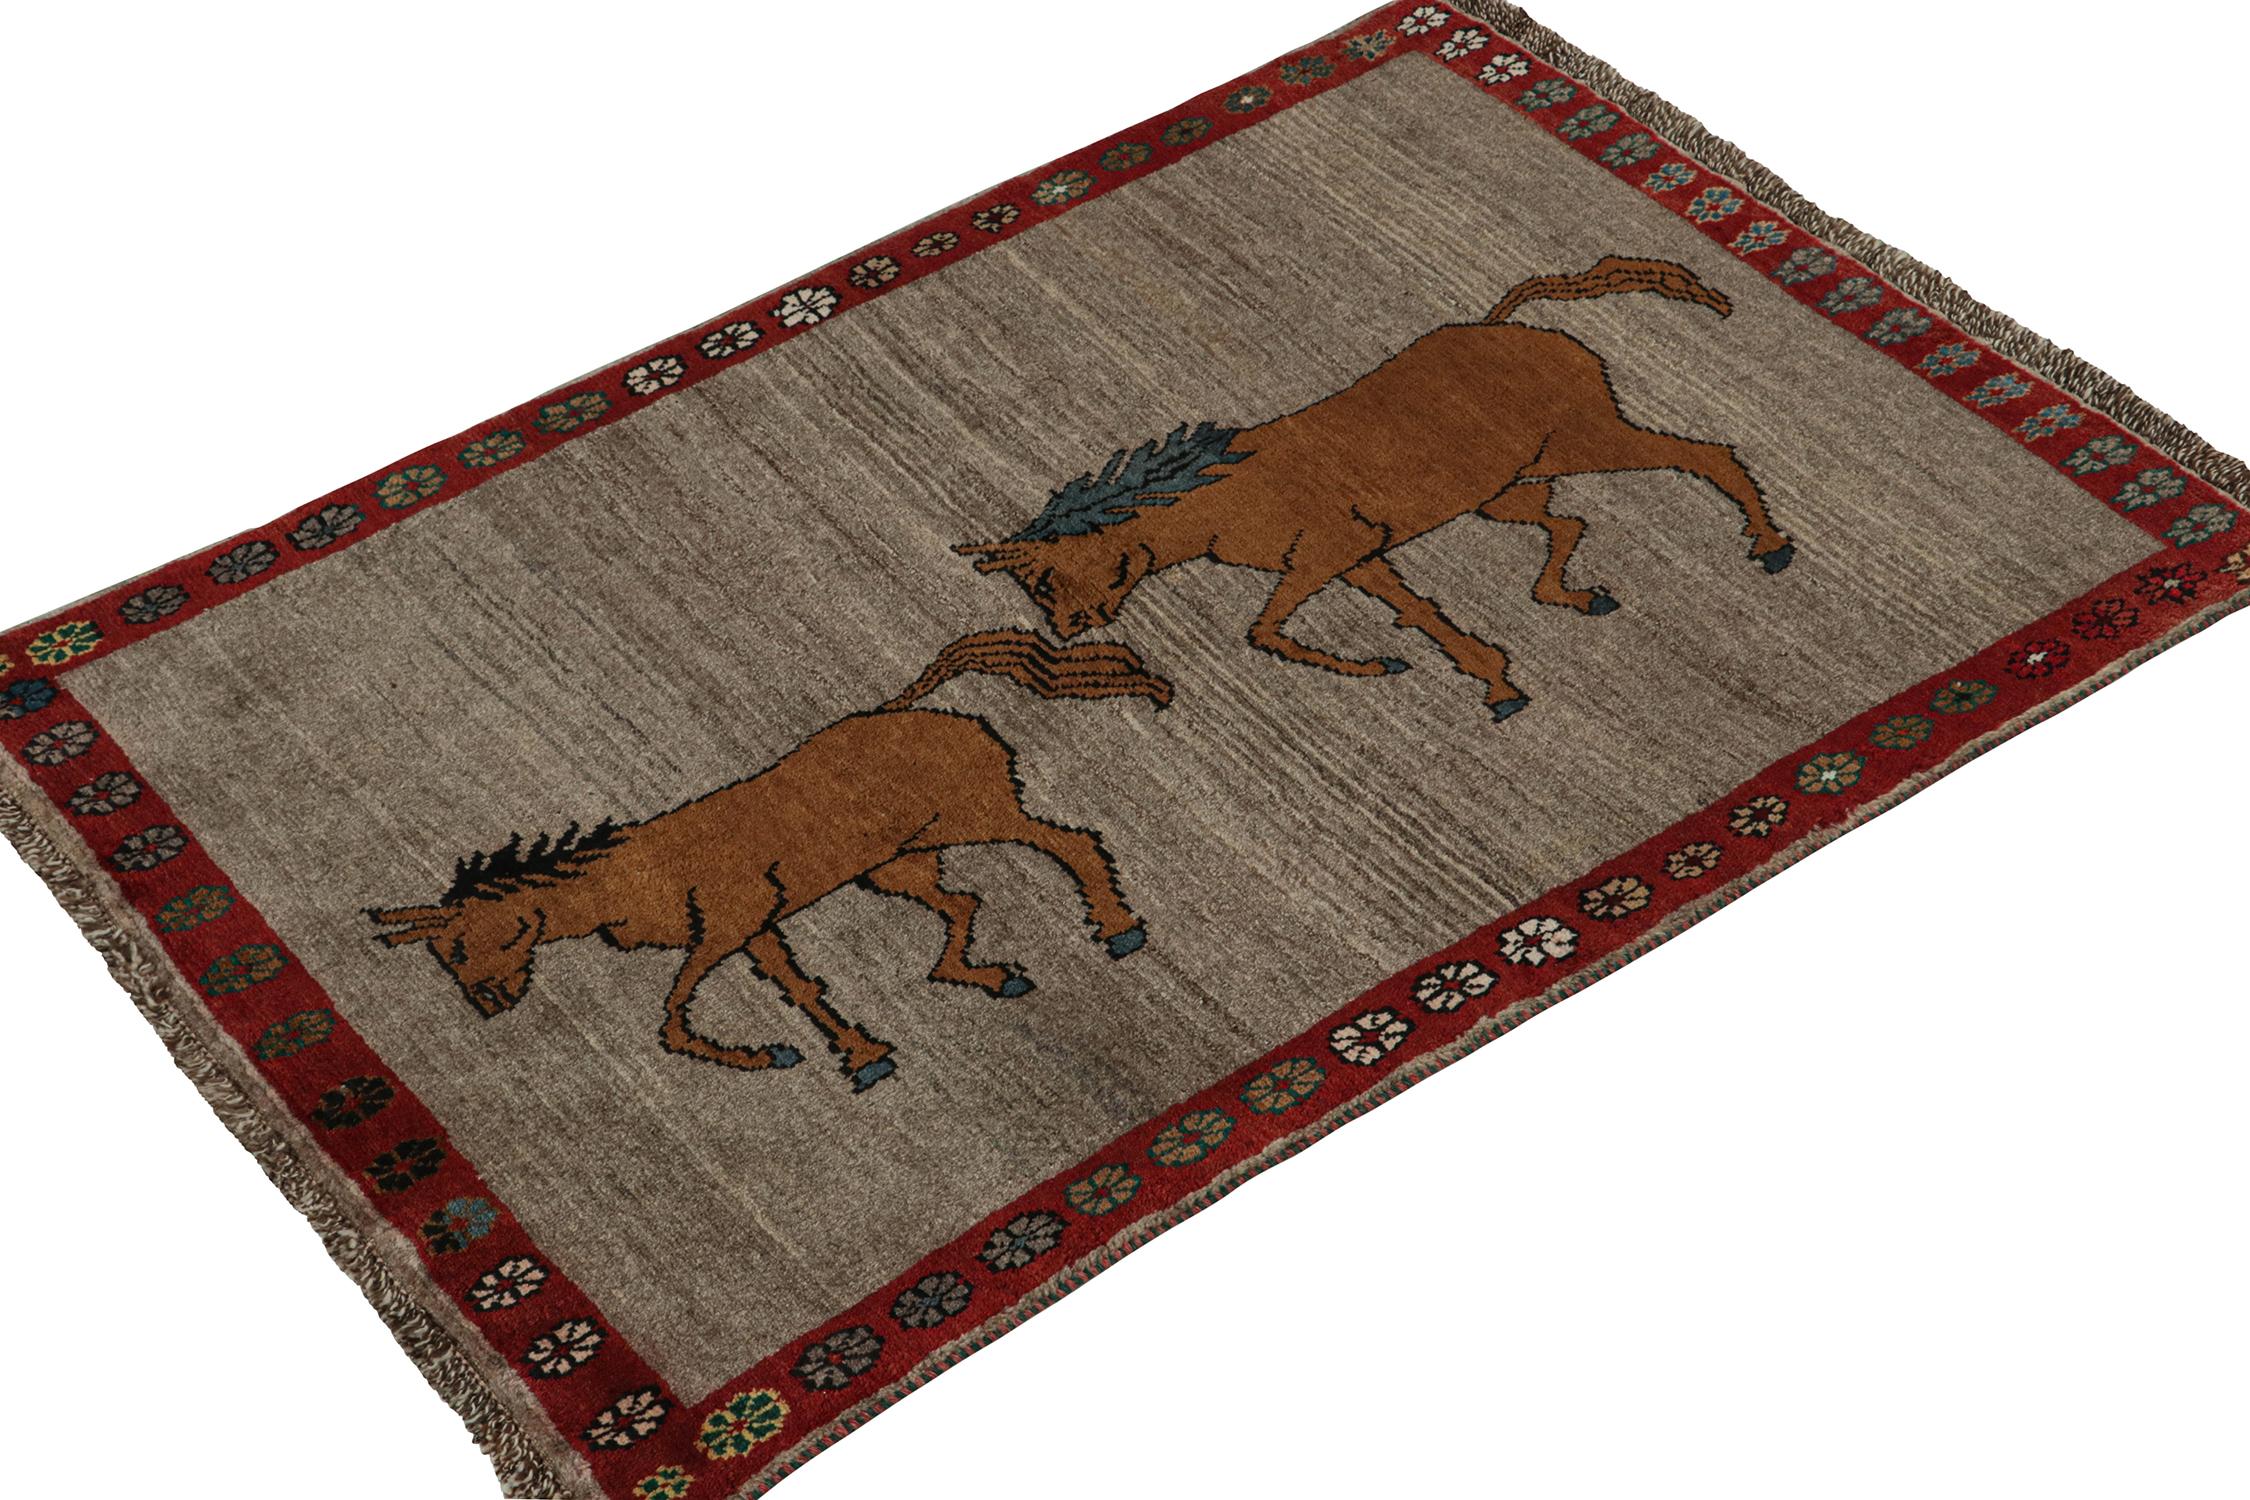 This vintage 3x5 Gabbeh Persian rug is from the latest entries in Rug & Kilim’s rare tribal curations. Hand-knotted in wool circa 1950-1960.

On the Design:

This tribal provenance is one of the most primitive, and collectible shabby-chic styles